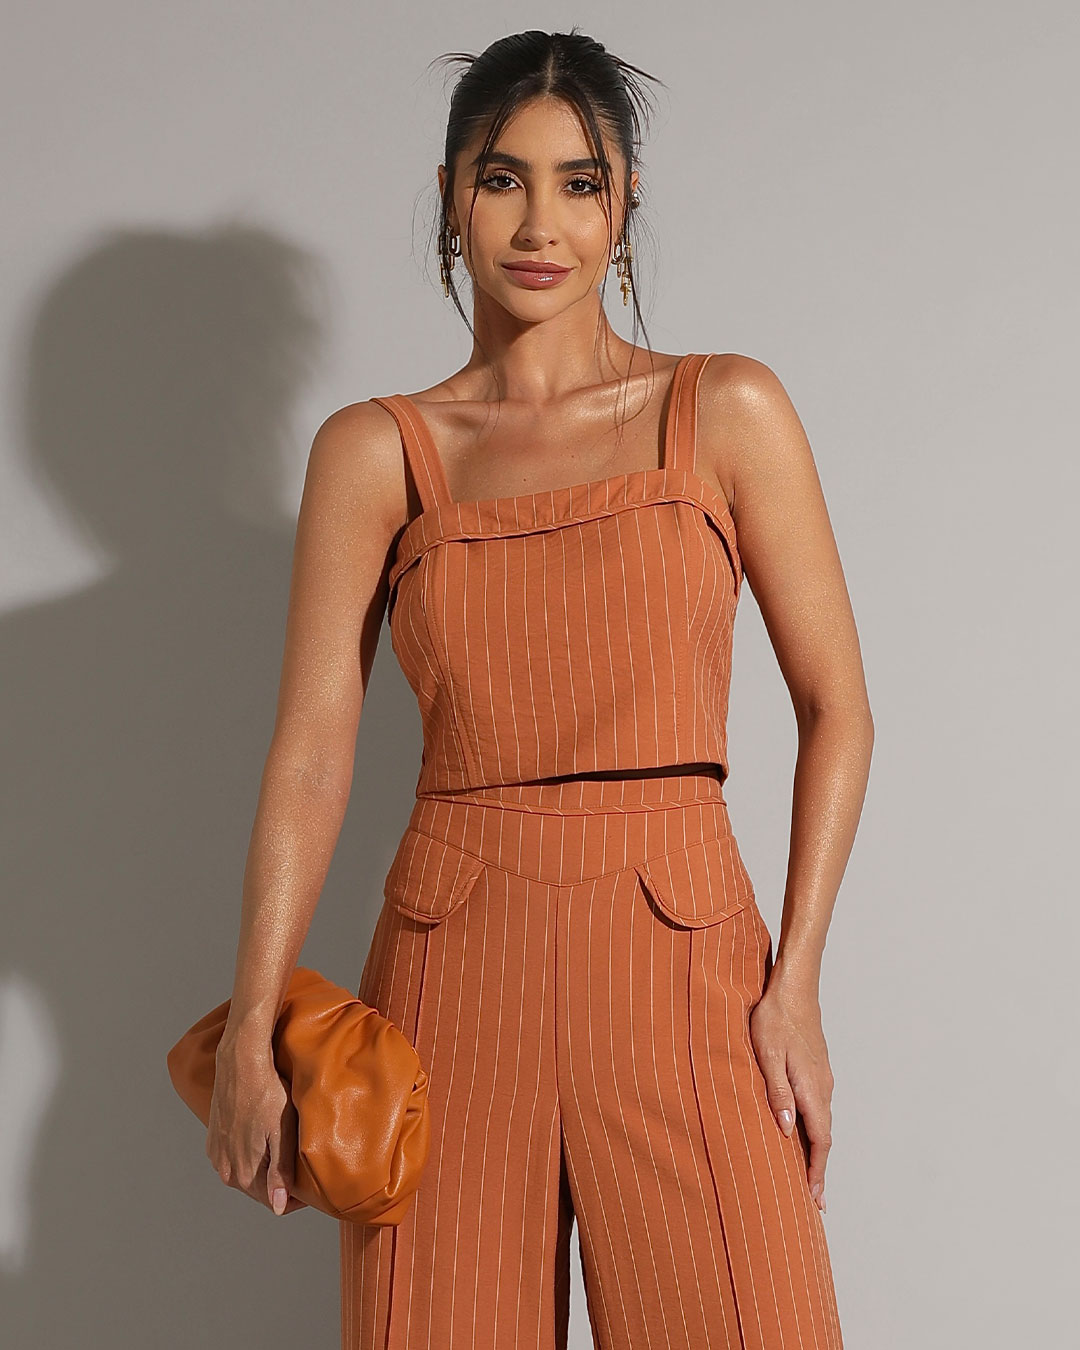 Miss Misses - Miss Misses Cropped Pinstripe Set and Caramel Pants - 54213134